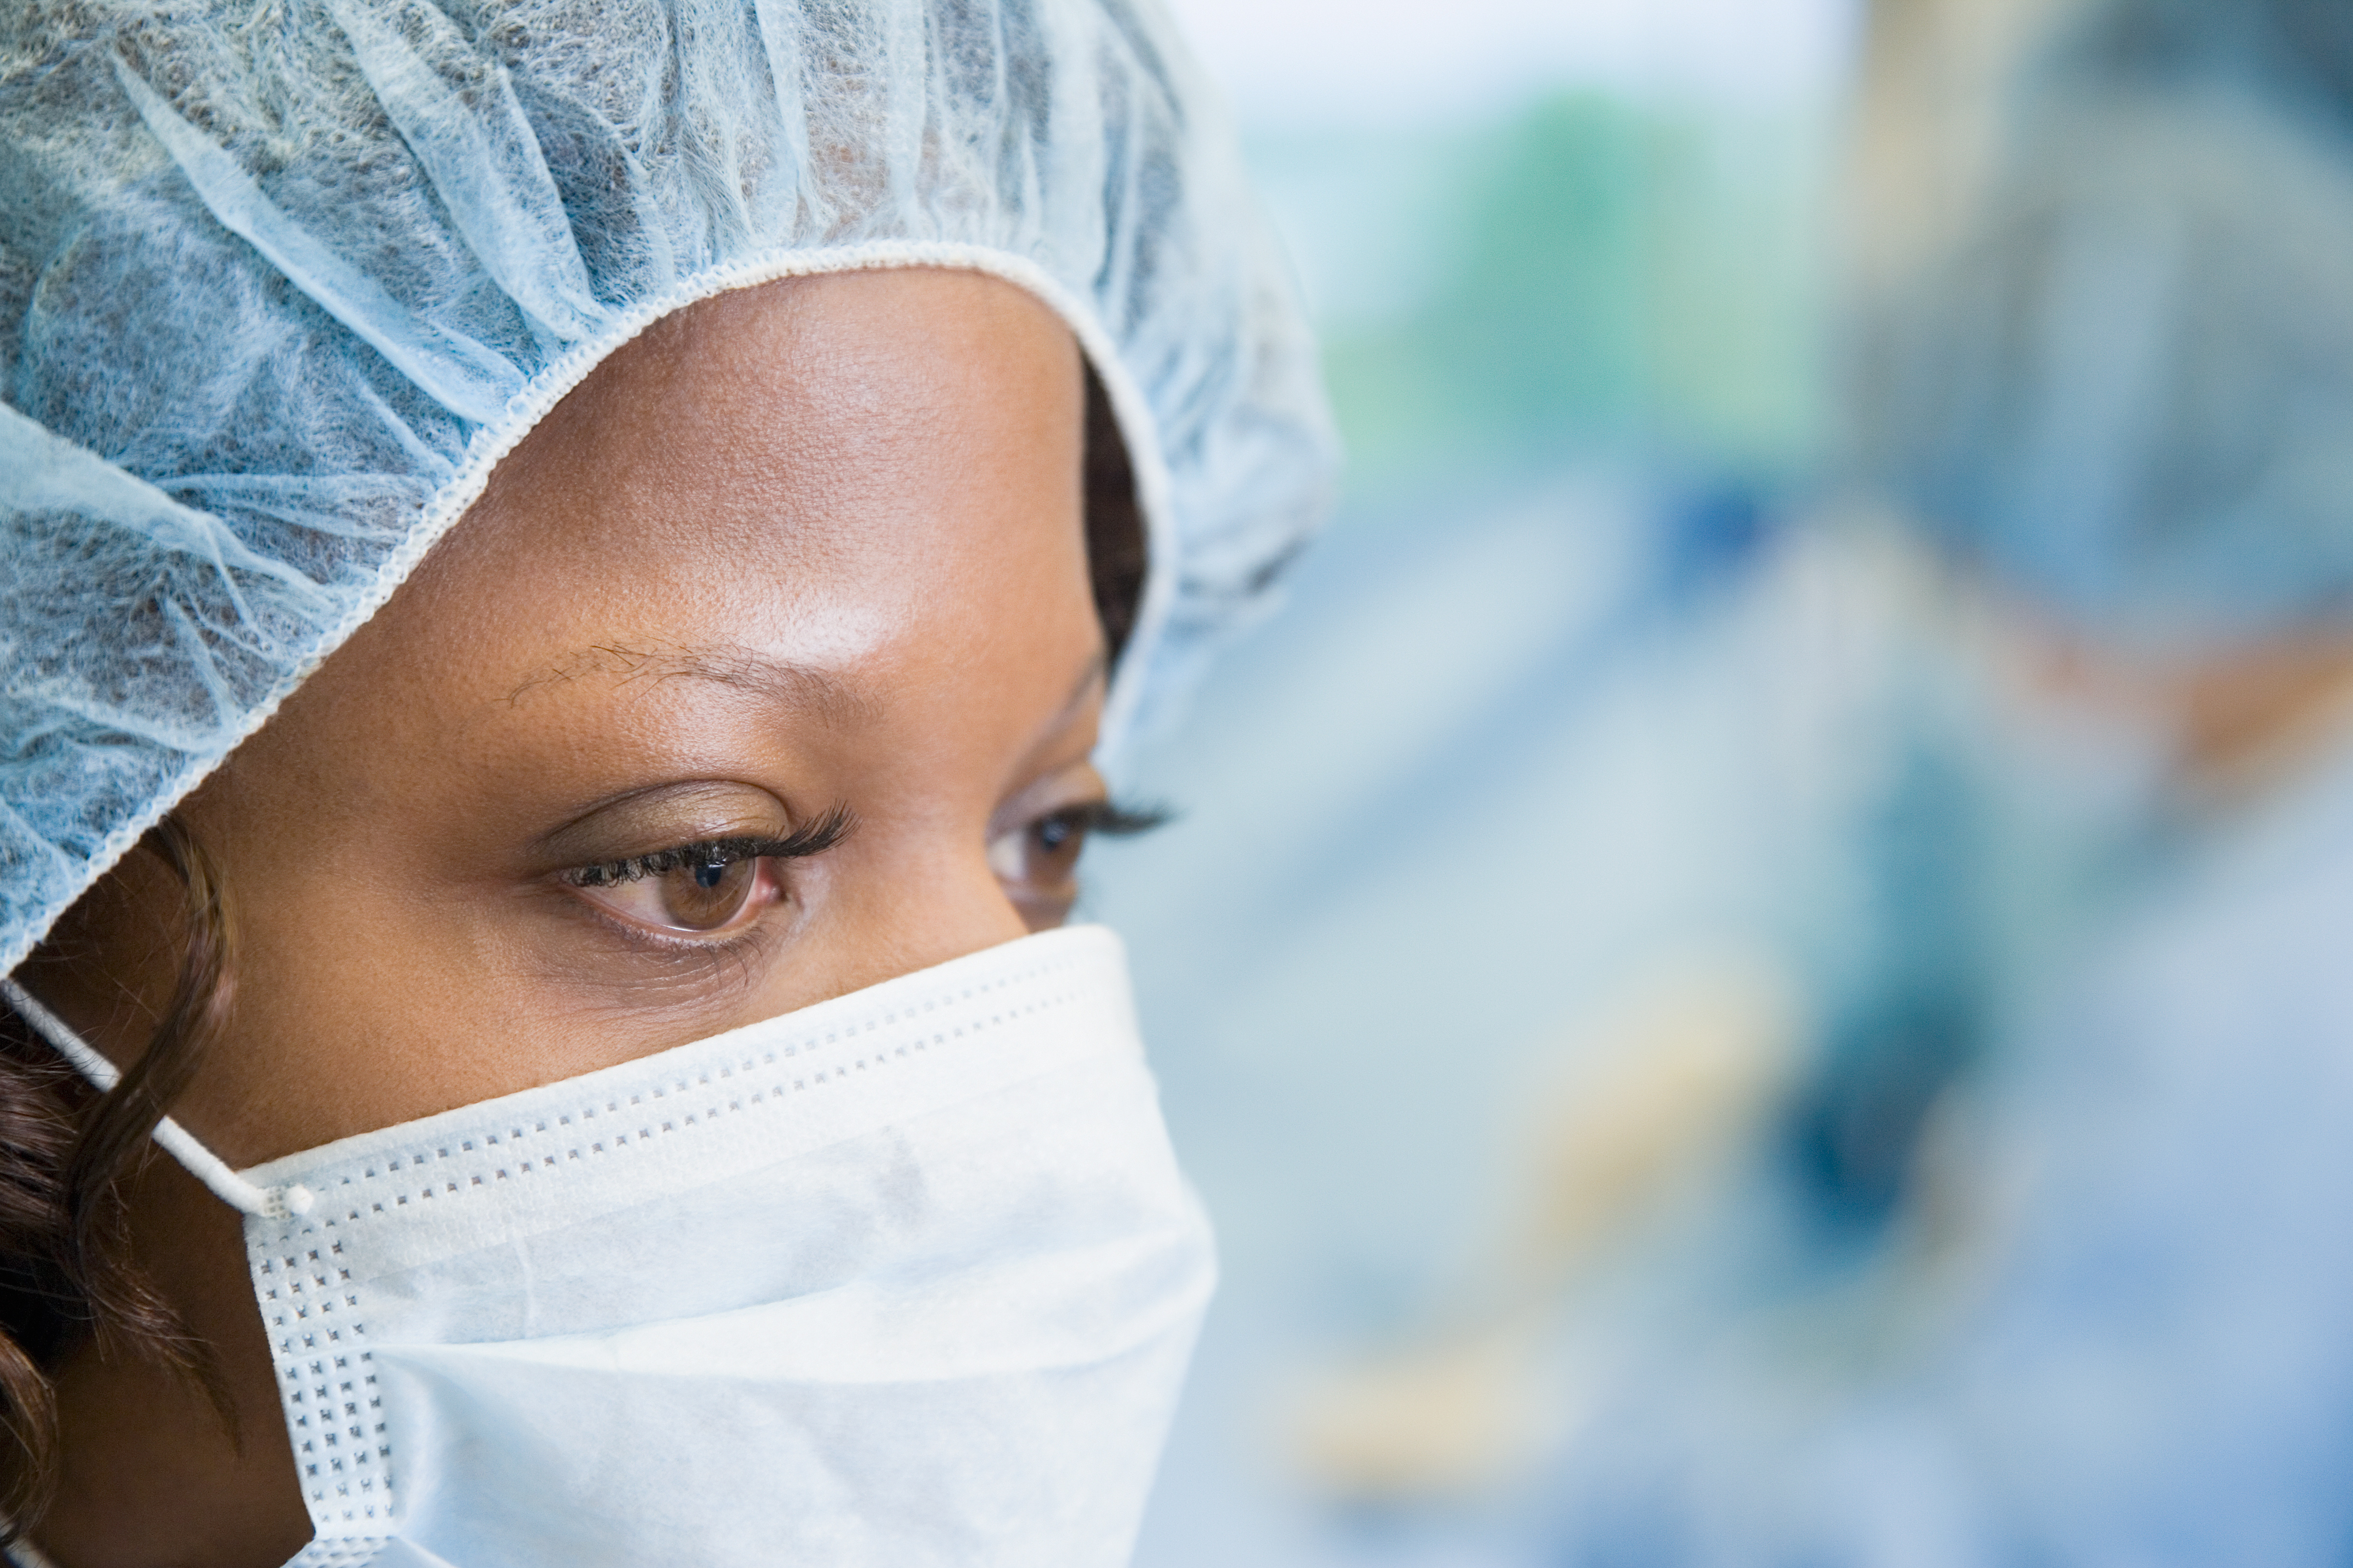 A surgeon focused on her work